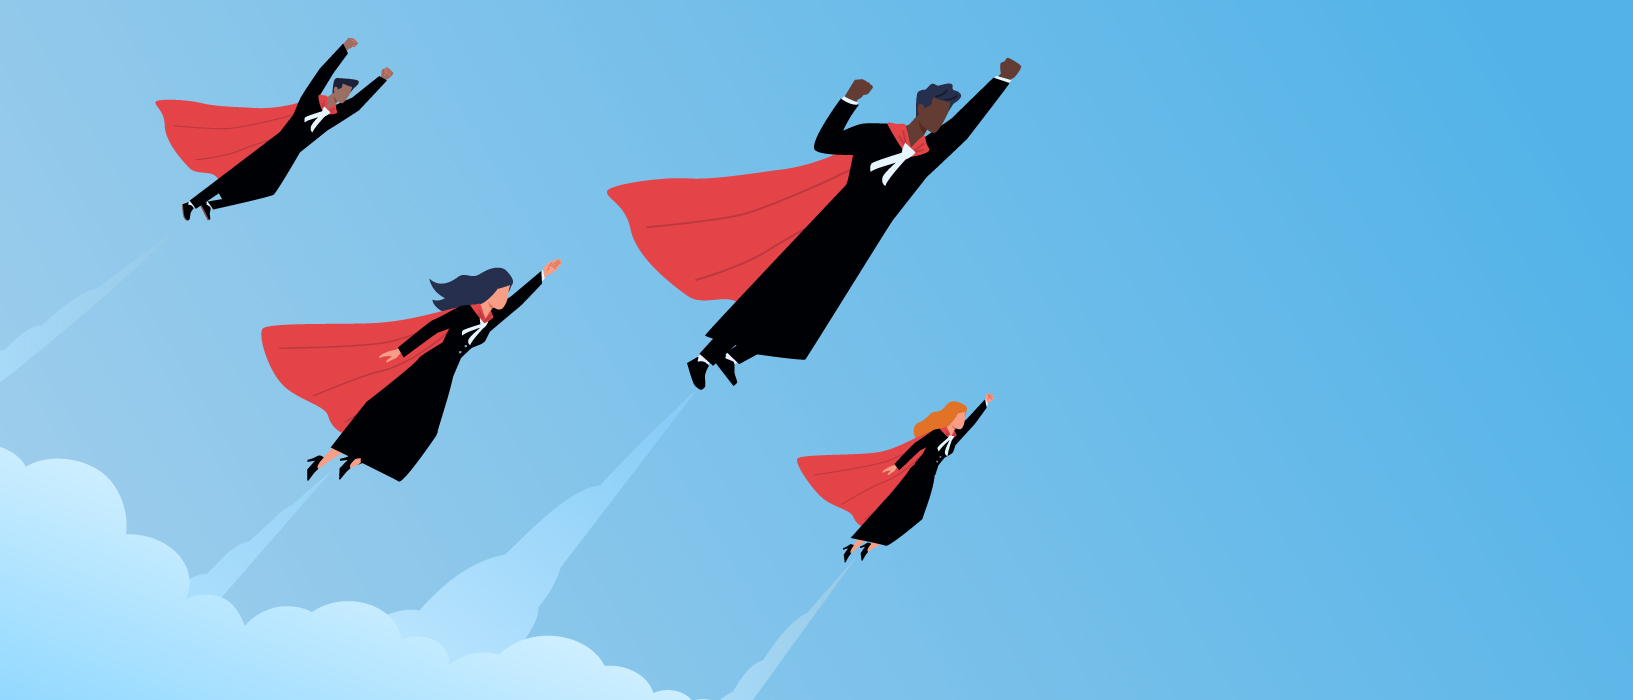 Icons of lawyers with superhero capes flying